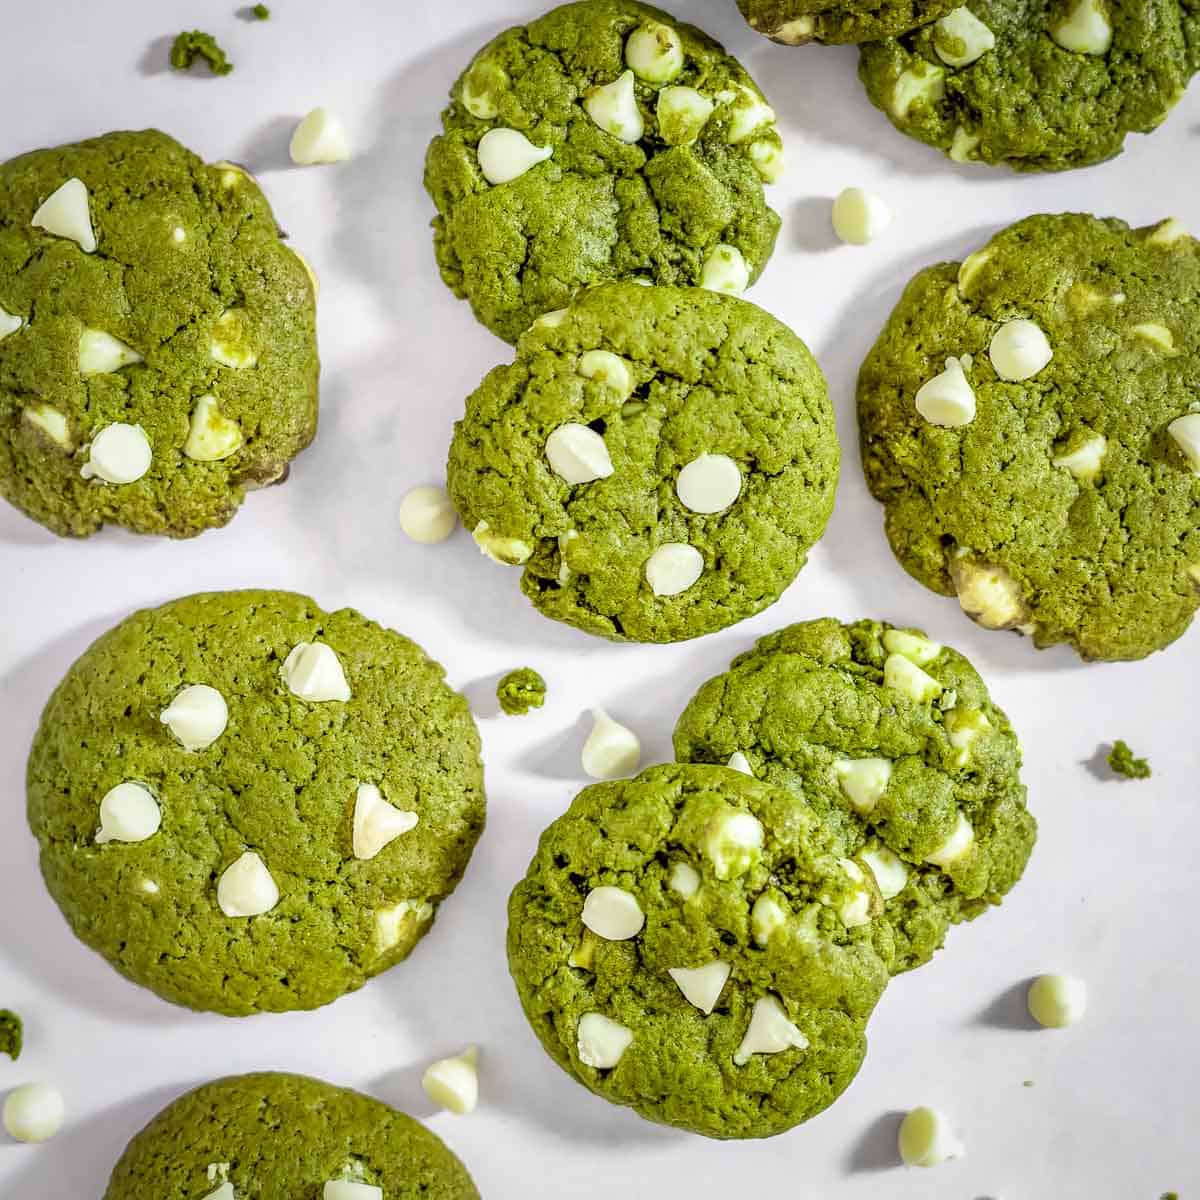 Overhead shot of many matcha cookies scattered on parchment paper with white chocolate chips sprinkled around.